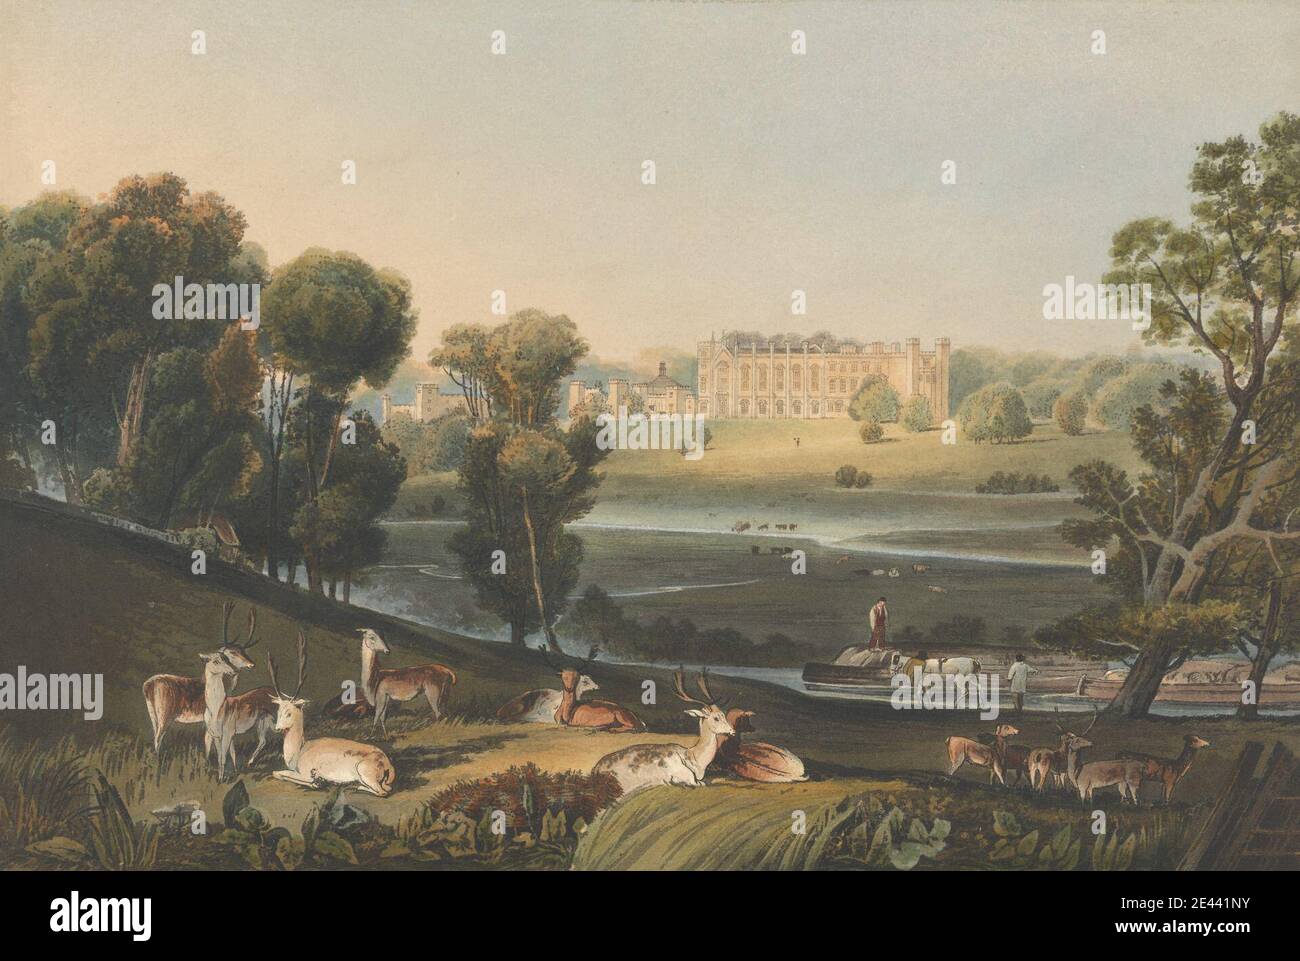 Robert Havell, 1769â€“1832, British, Cassiobury, Herfordshire, The Seat of the Earl of Essex, 1816. later state, 1837 edition: colored by hand. Stock Photo